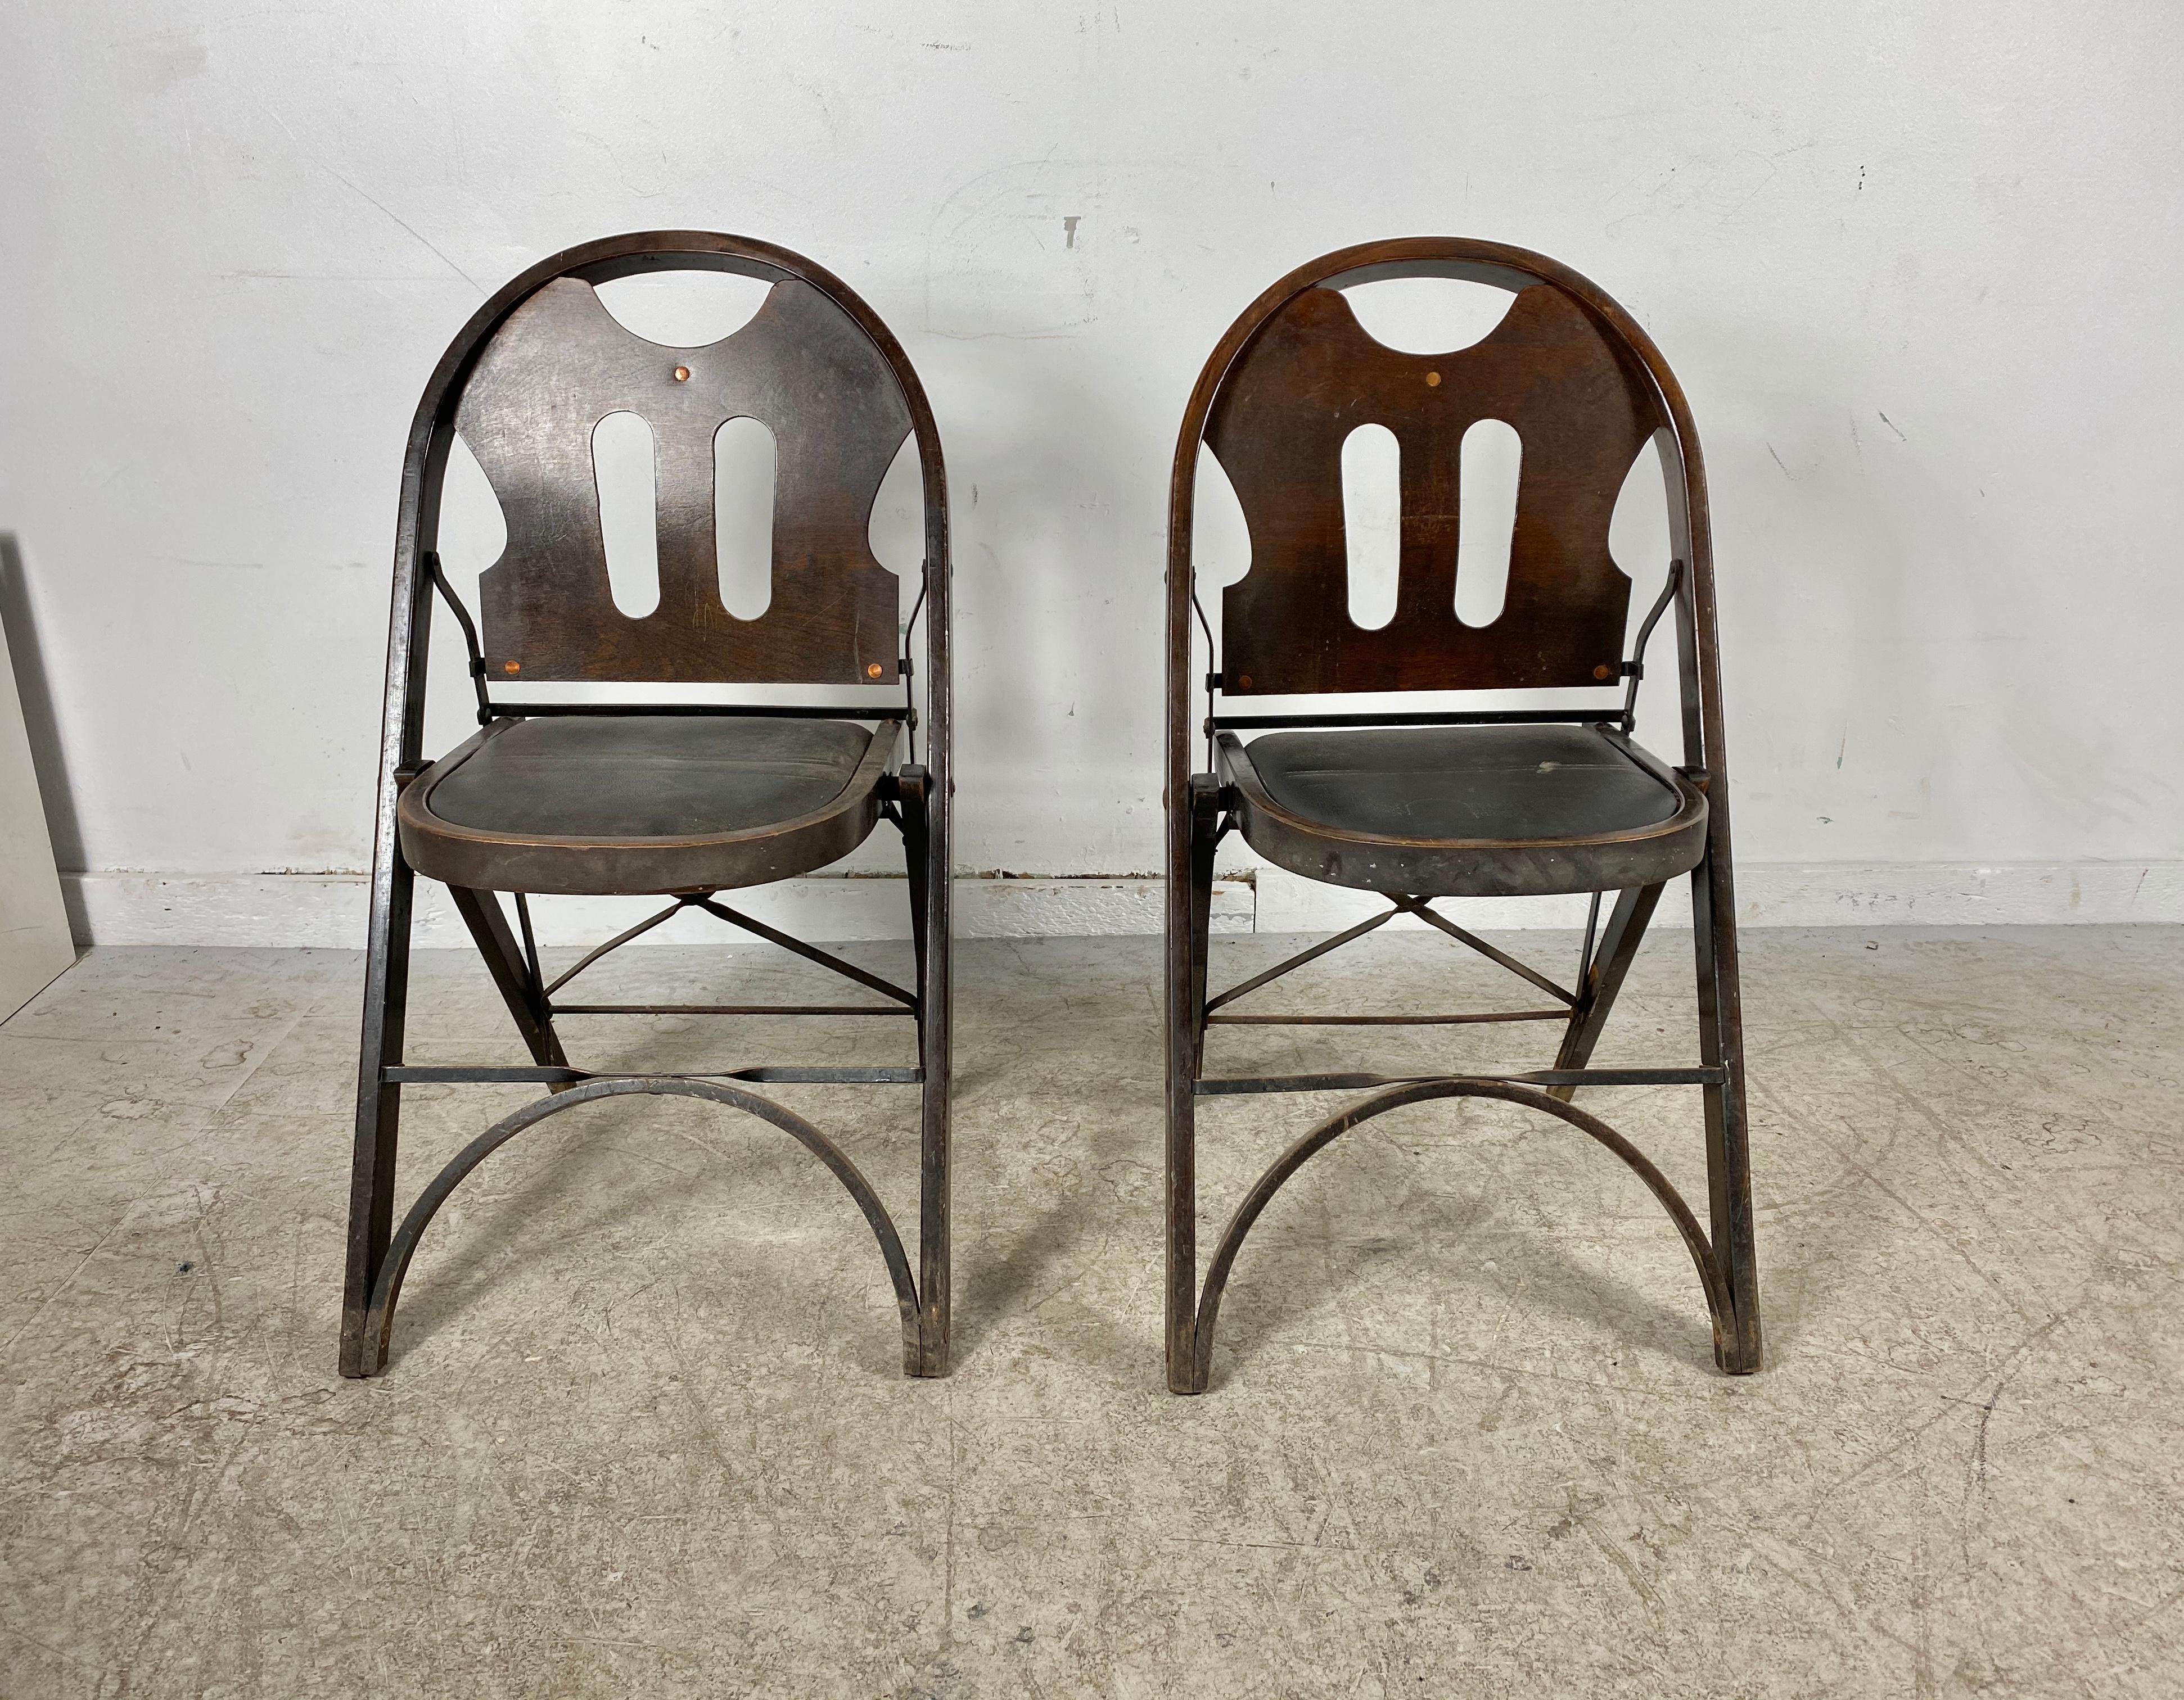 Louis Rostetter & Sons turn of the century industrial folding chairs, solid comfort, amazing design, part of the permanent collection of San Francisco Museum of Modern Art, retain original finish, patina as well as original labels.